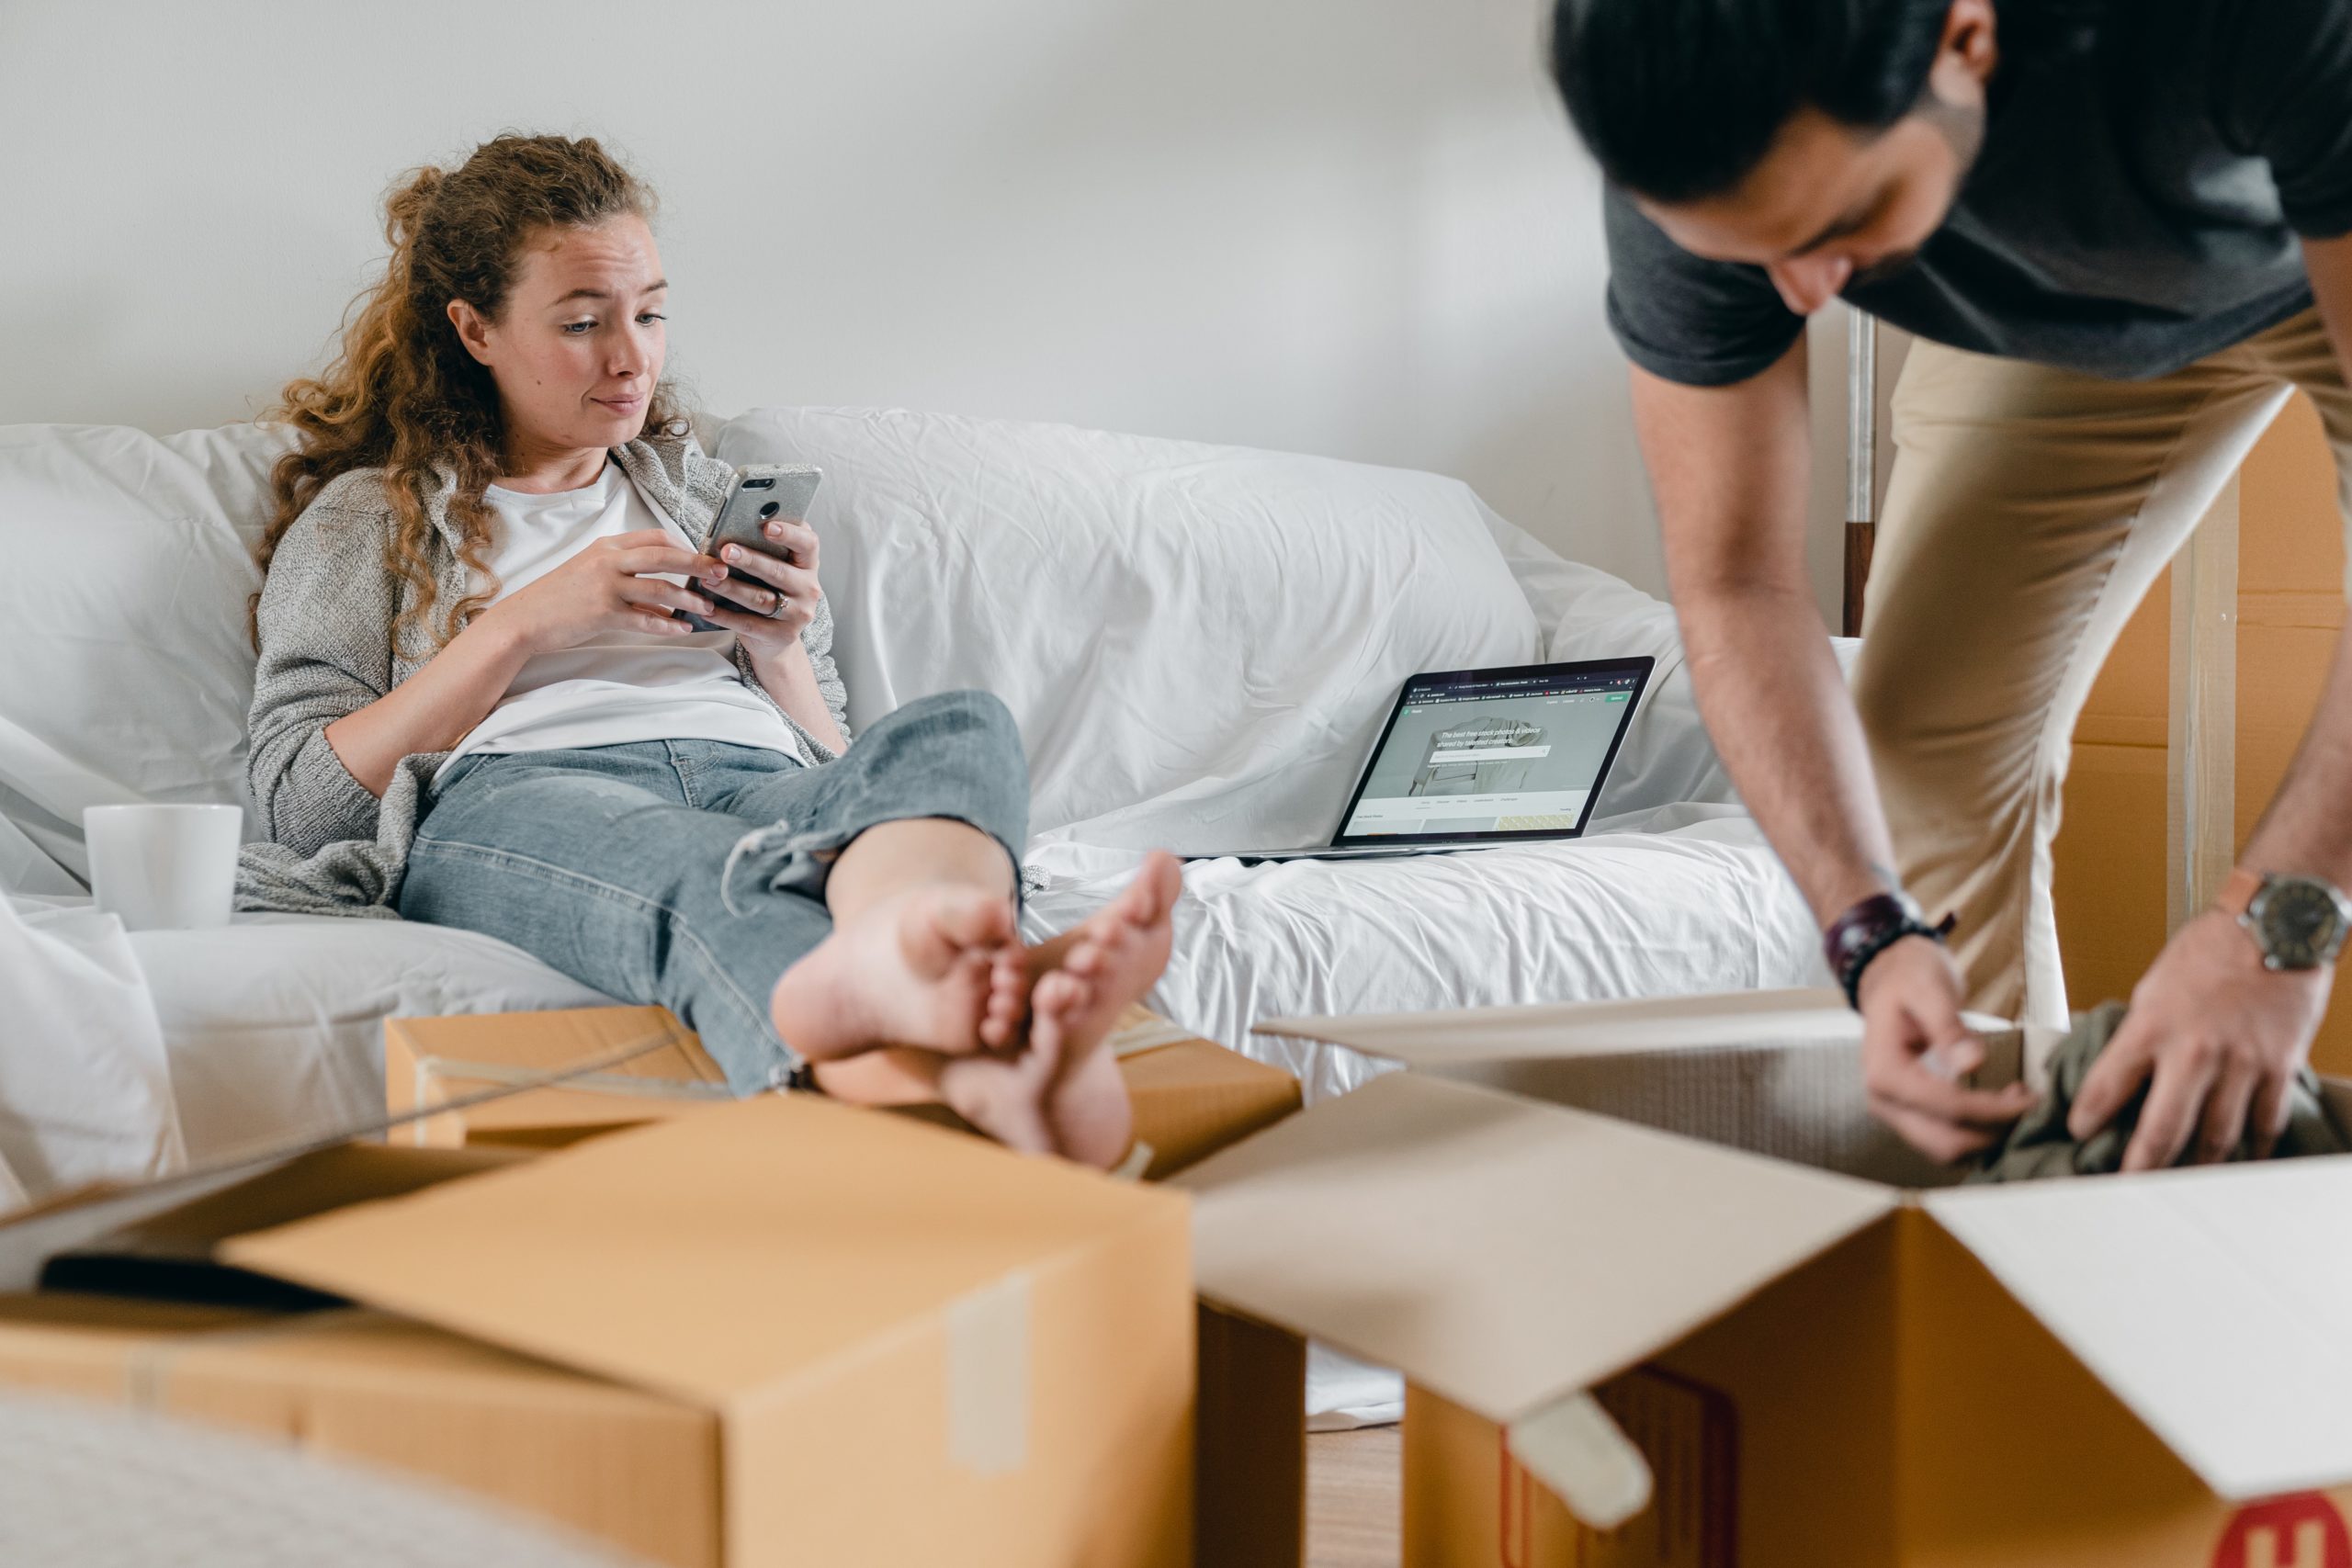 picture of woman sitting on couch next to laptop using iphone and man standing unpacking a moving box